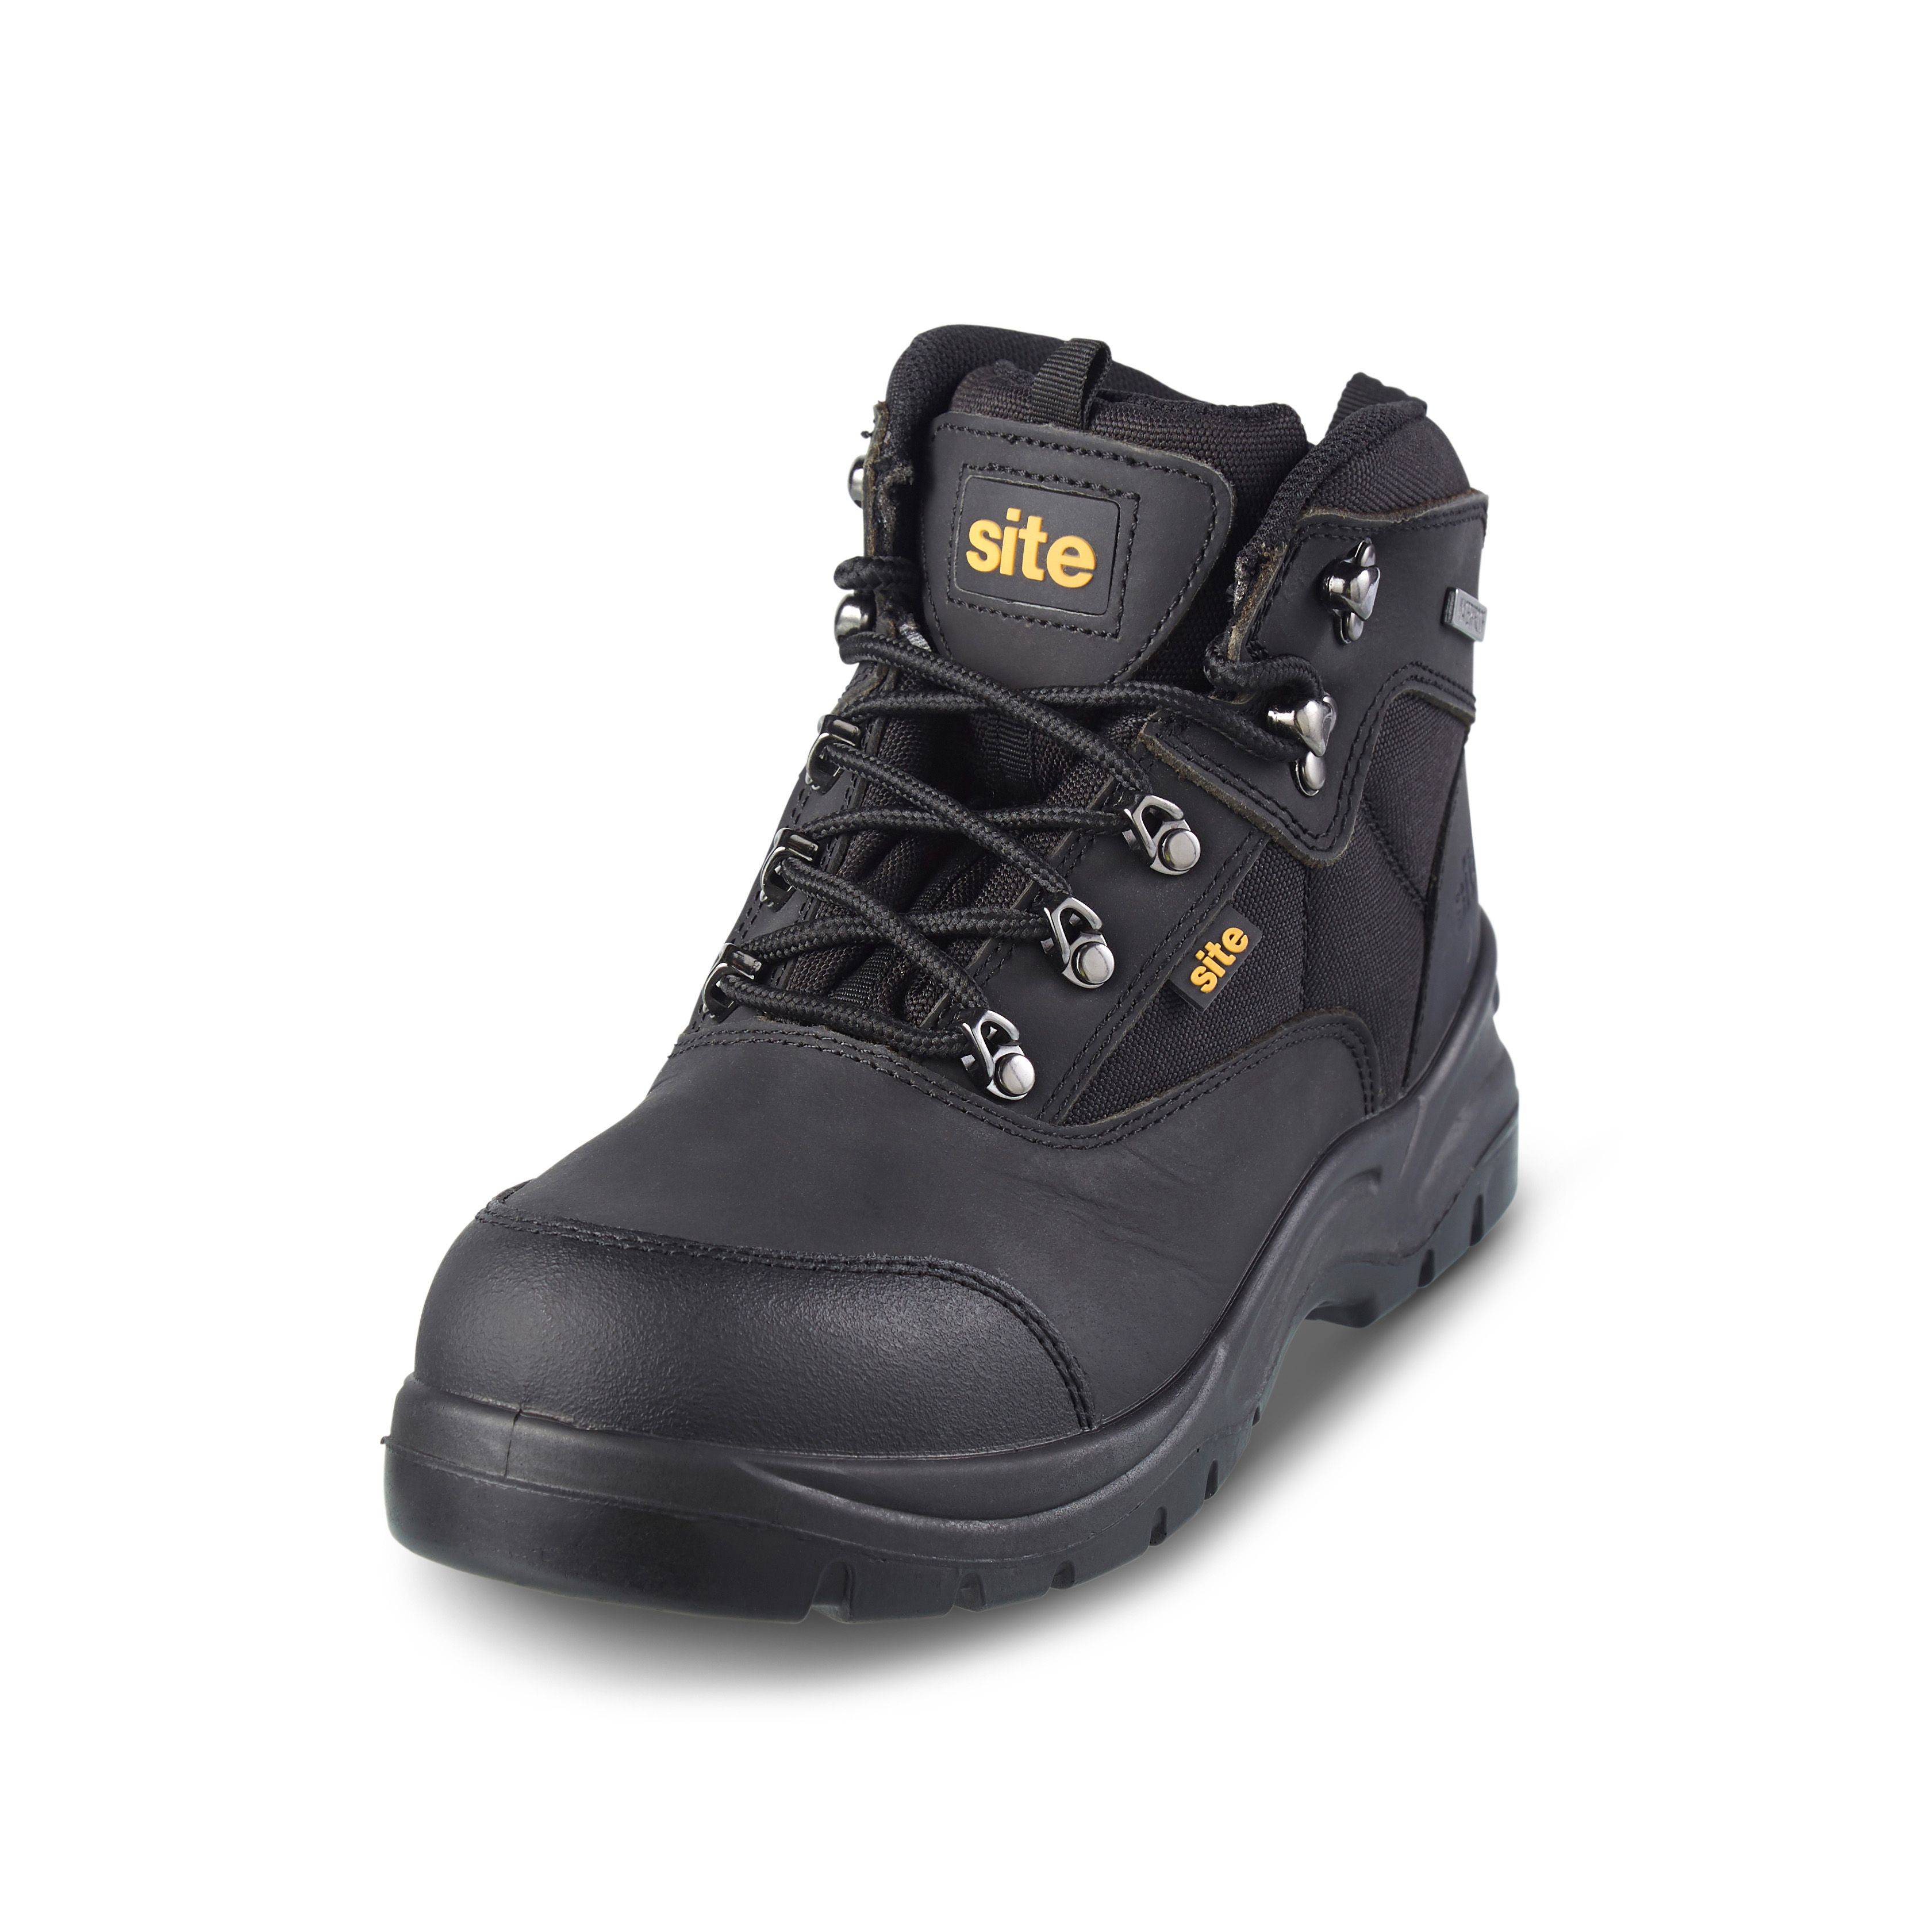 Site Onyx Men's Black Safety boots, Size 9 | DIY at B&Q